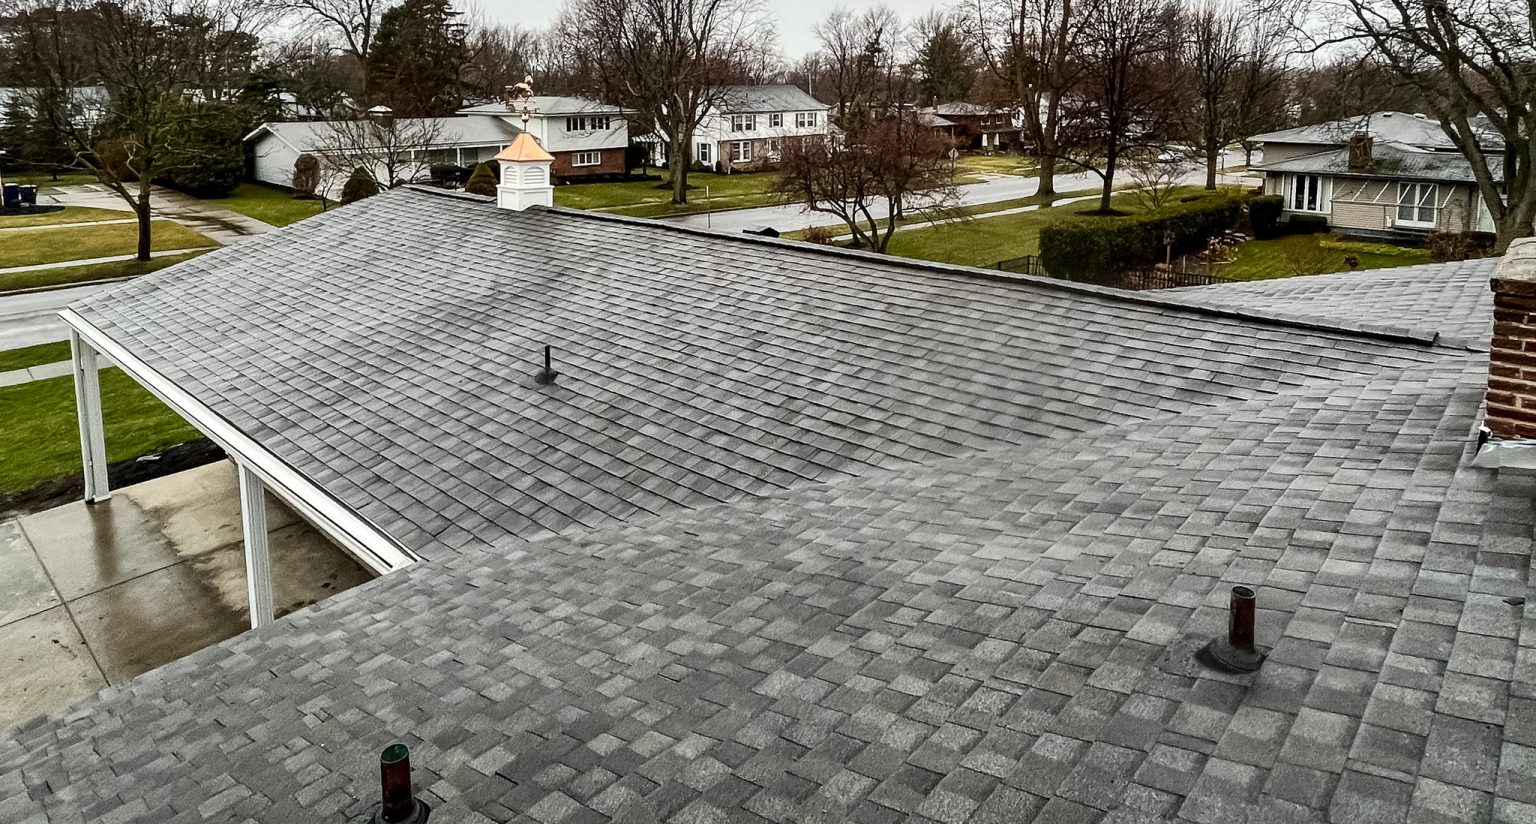 Residential shingle roof installation in Amherst, NY